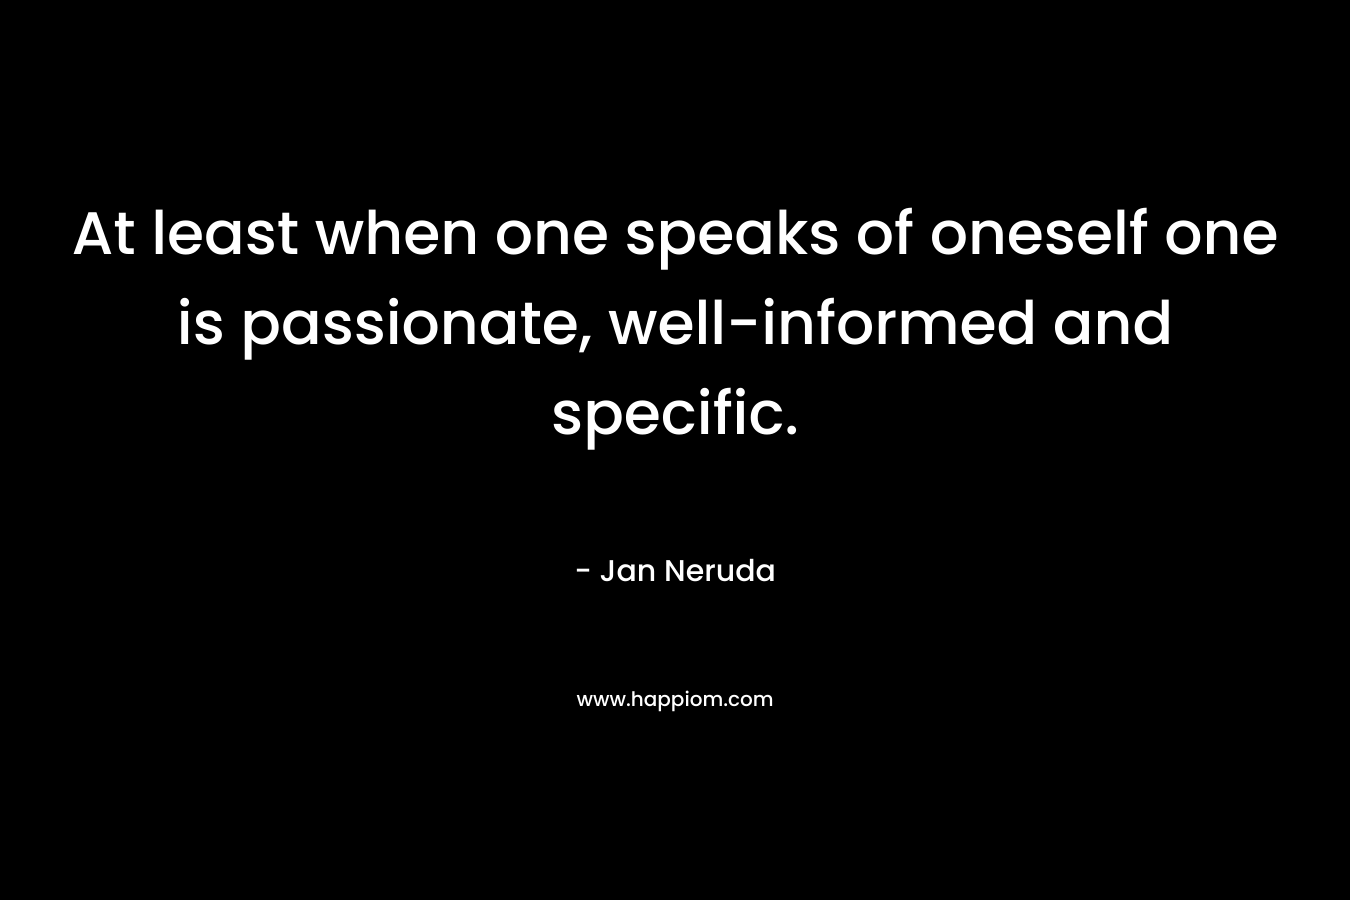 At least when one speaks of oneself one is passionate, well-informed and specific.